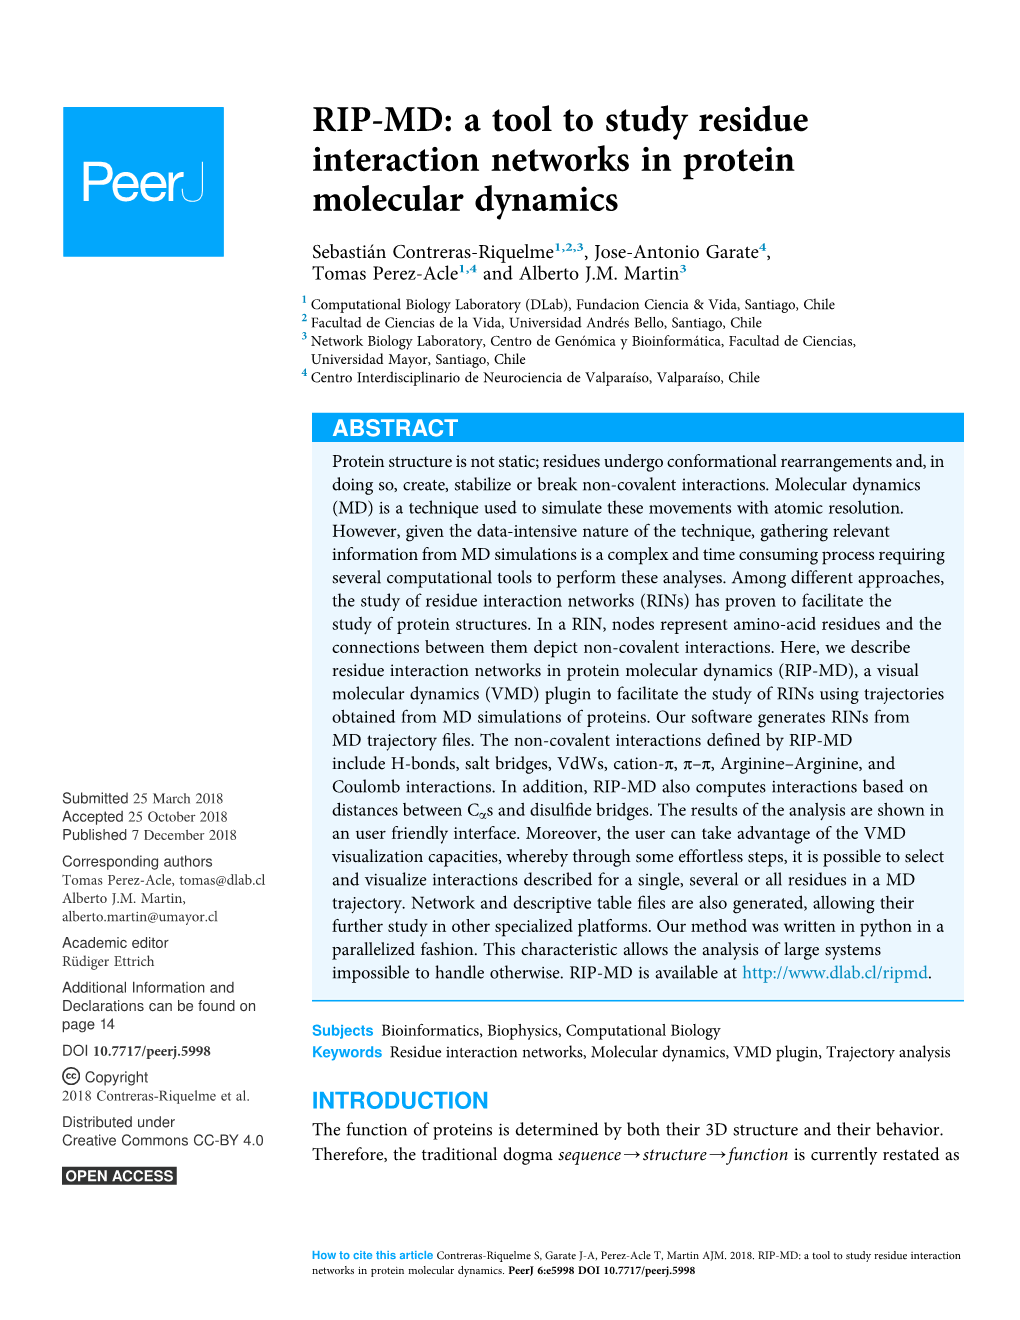 RIP-MD: a Tool to Study Residue Interaction Networks in Protein Molecular Dynamics